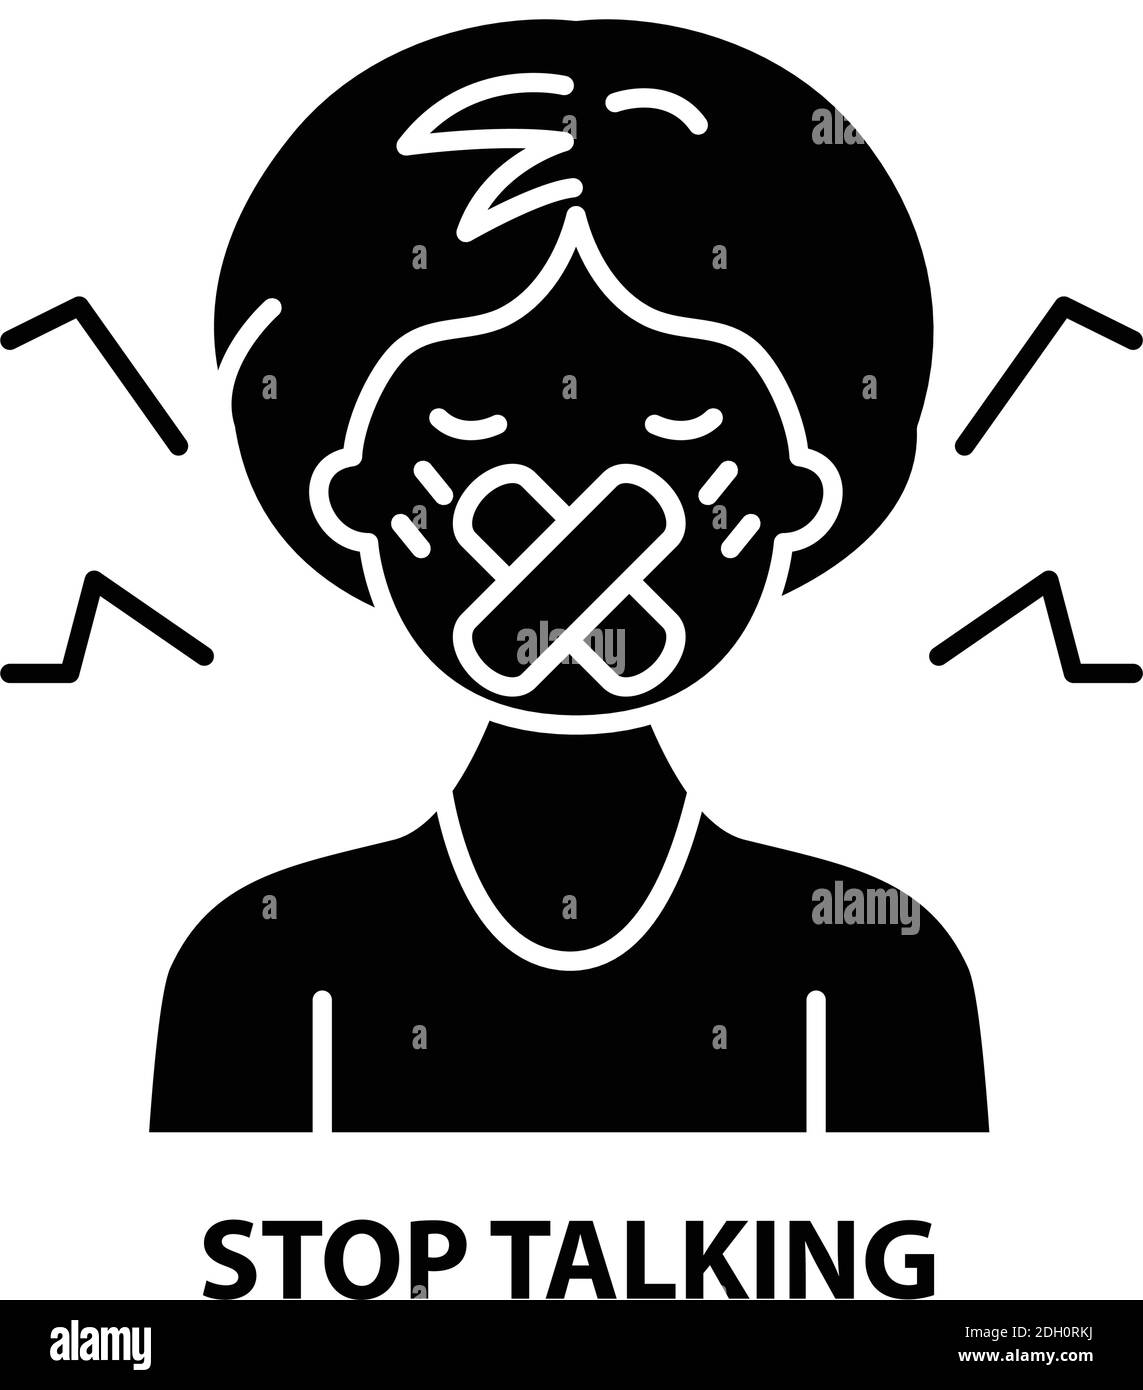 stop talking symbol icon, black vector sign with editable strokes, concept illustration Stock Vector